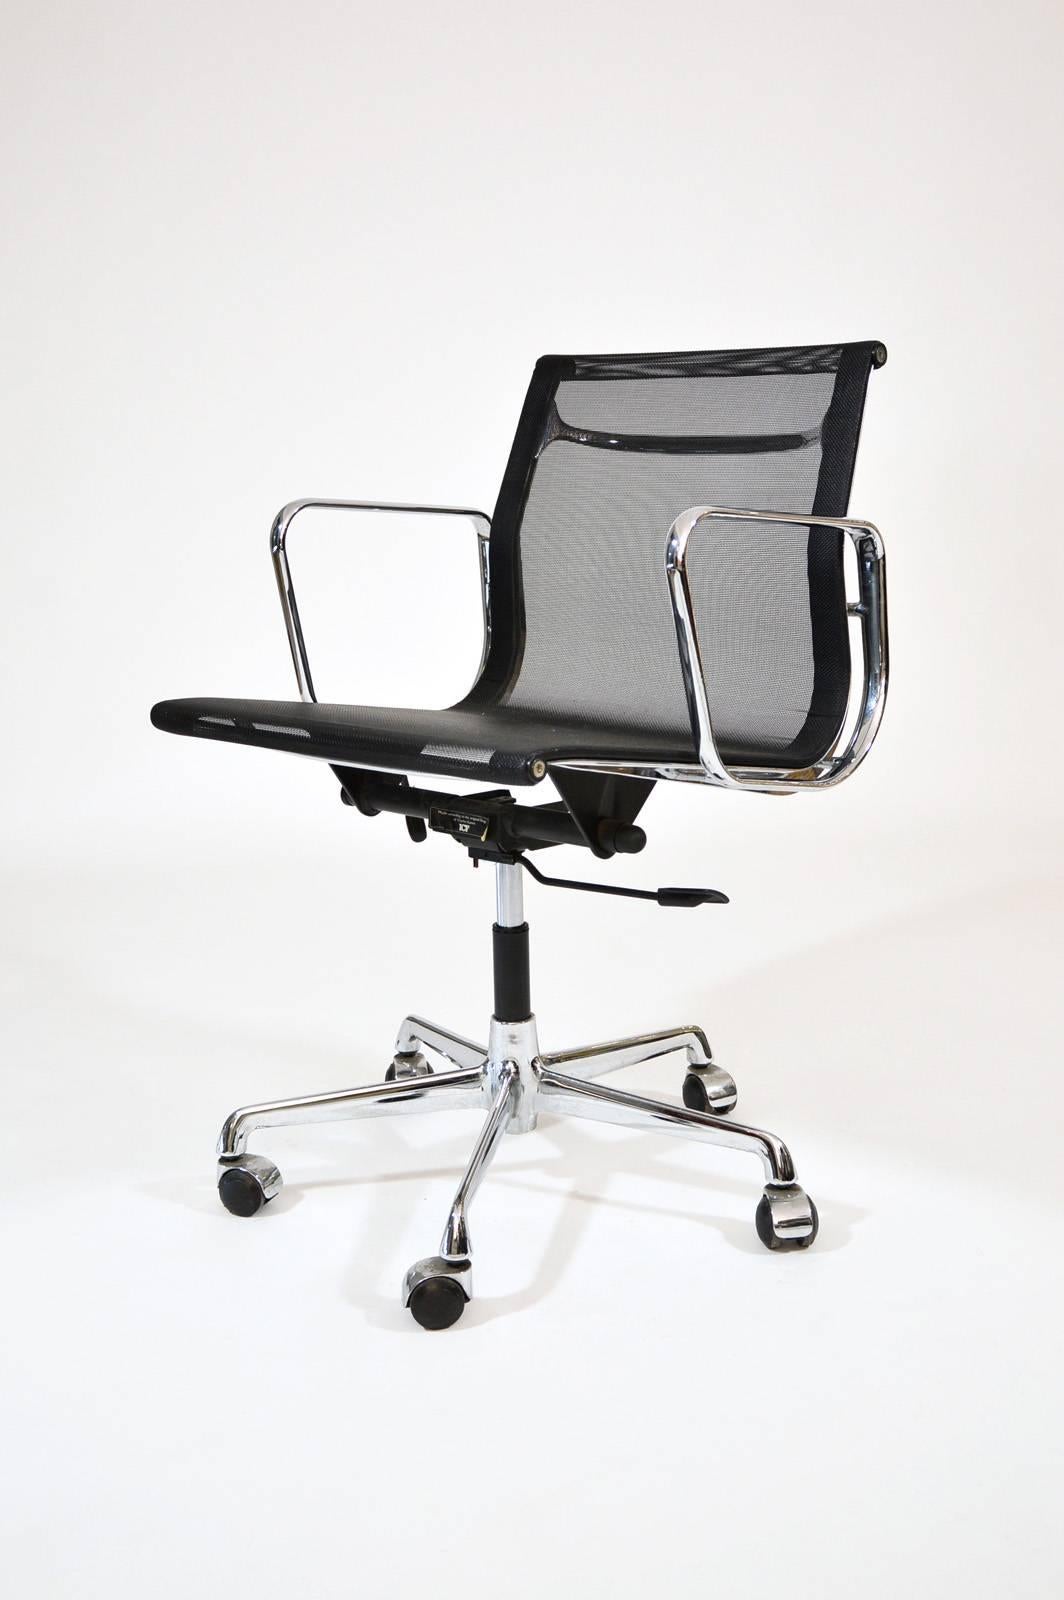 An Aluminium Group chair, designed by Charles Eames for Herman Miller in 1959, with black mesh upholstery, produced in Italy by ICF, under license of Heman Miller.
In very good condition, swiveling and adjustable in height.